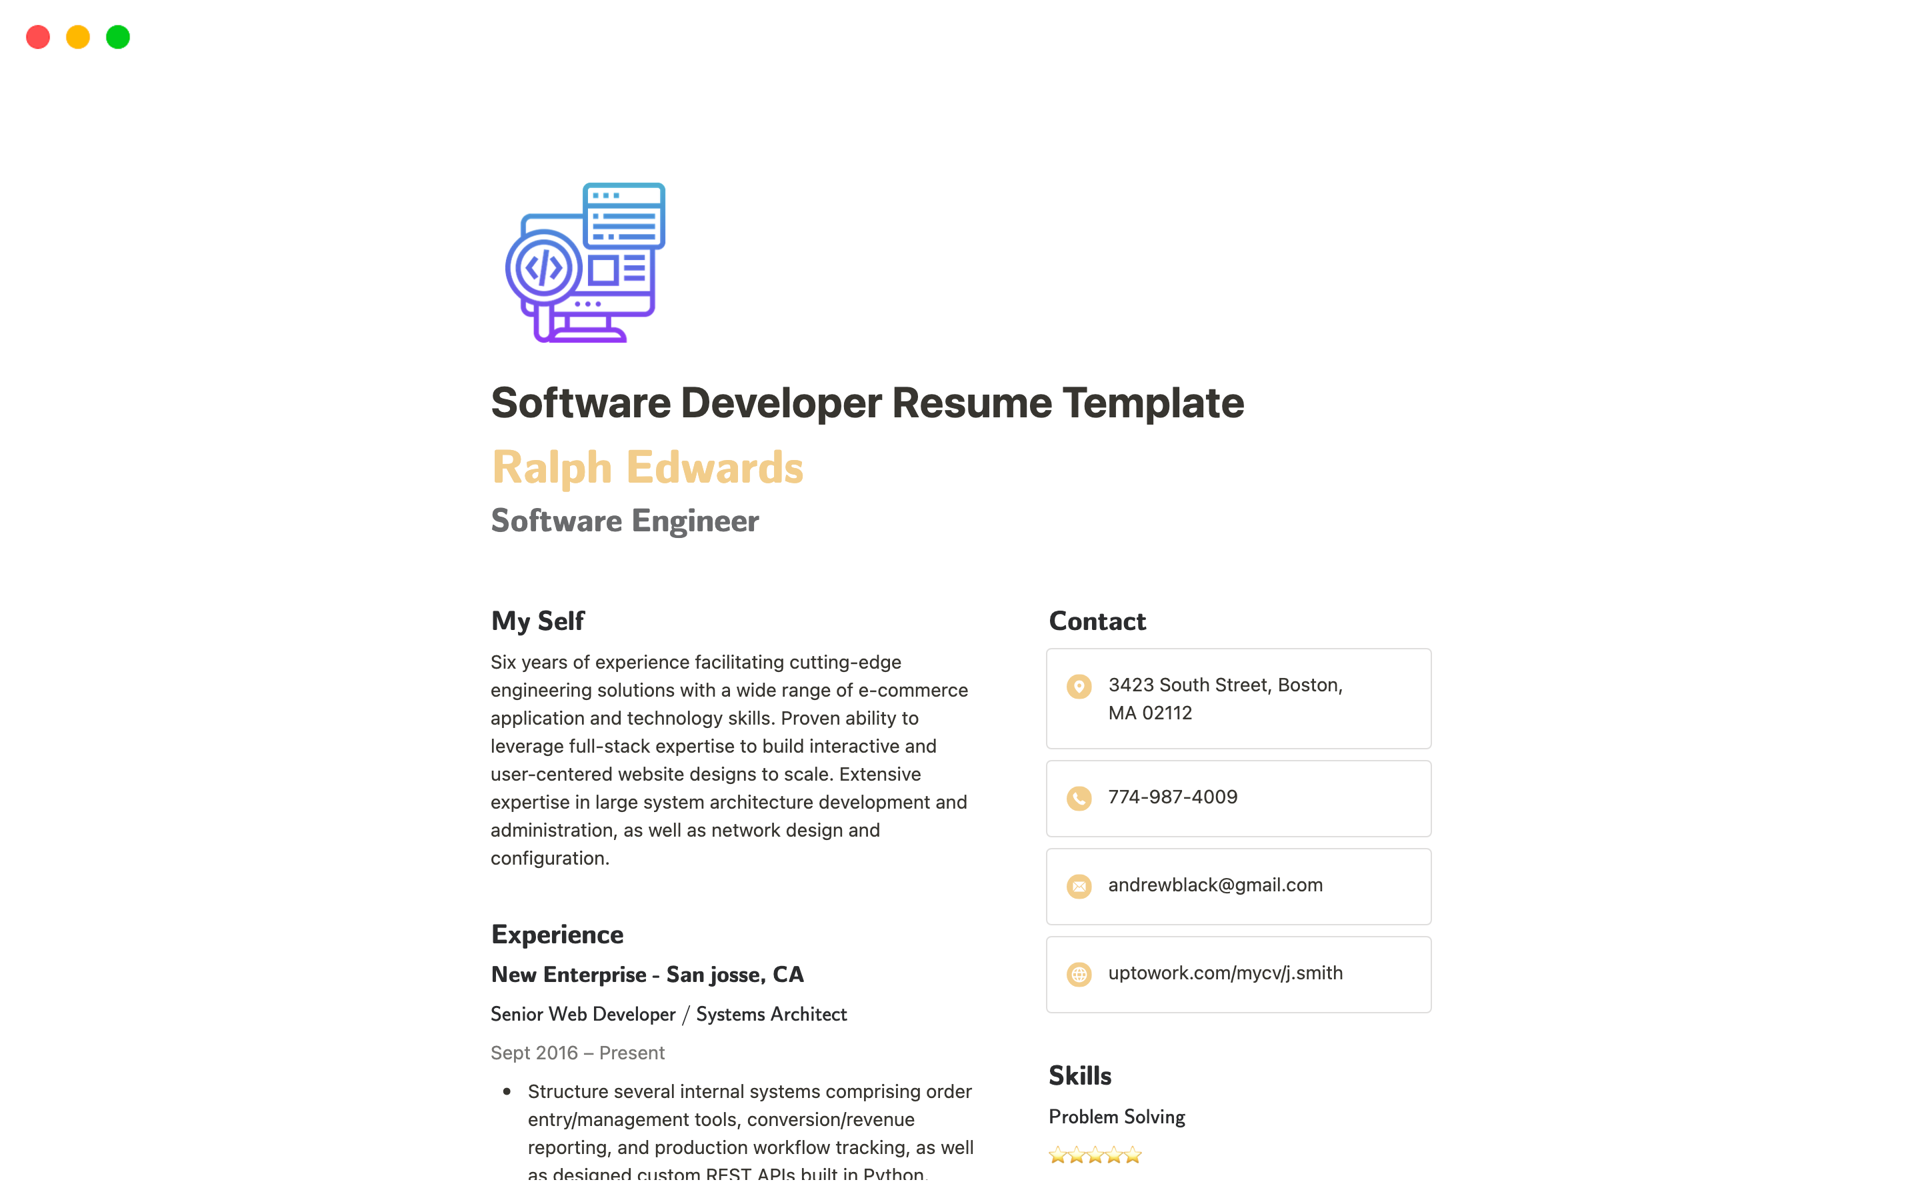 💻 Software Developer Odyssey: Code Maestro Edition 🌟
Embark on a coding odyssey with our Software Developer Resume Template, thoughtfully designed to guide you through showcasing your skills and experiences.